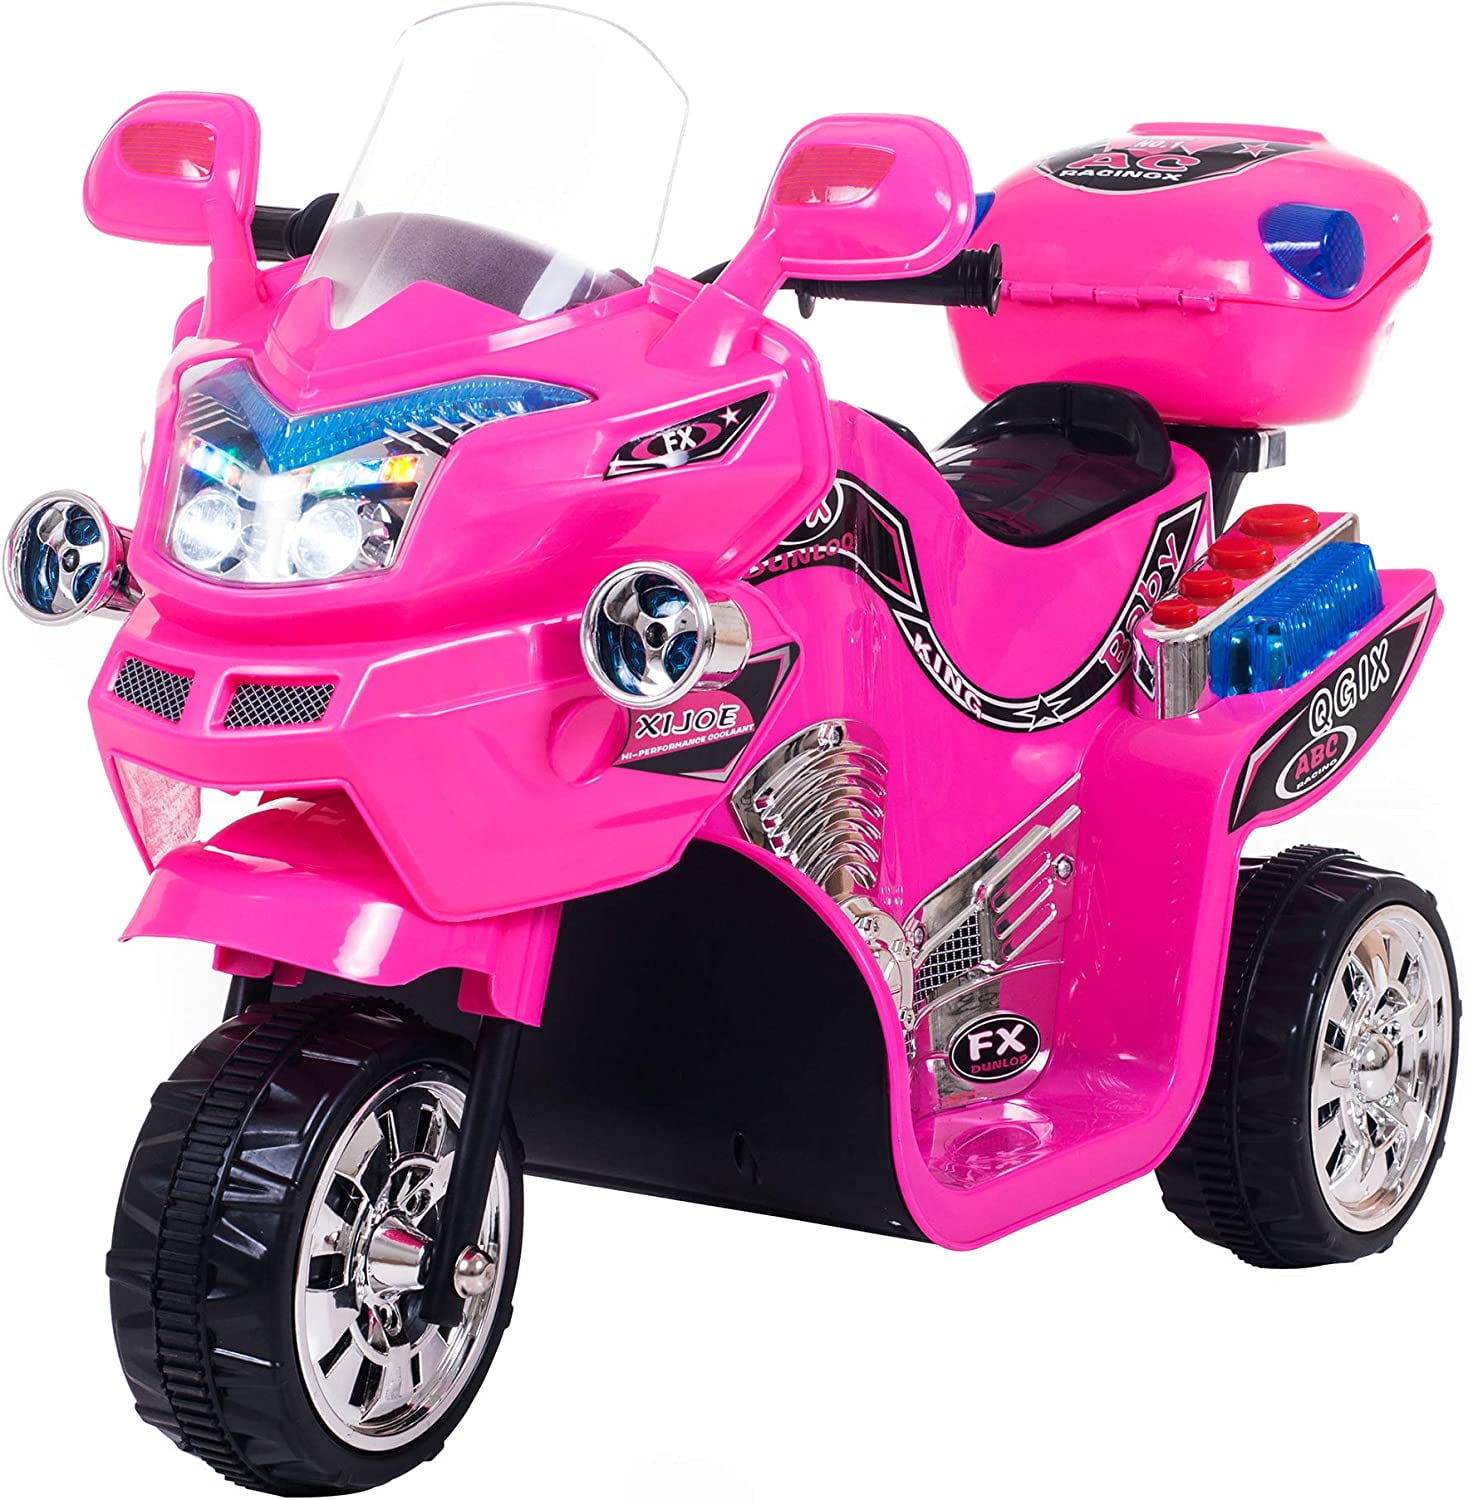 Ride On Toy 3 Wheel Motorcycle For